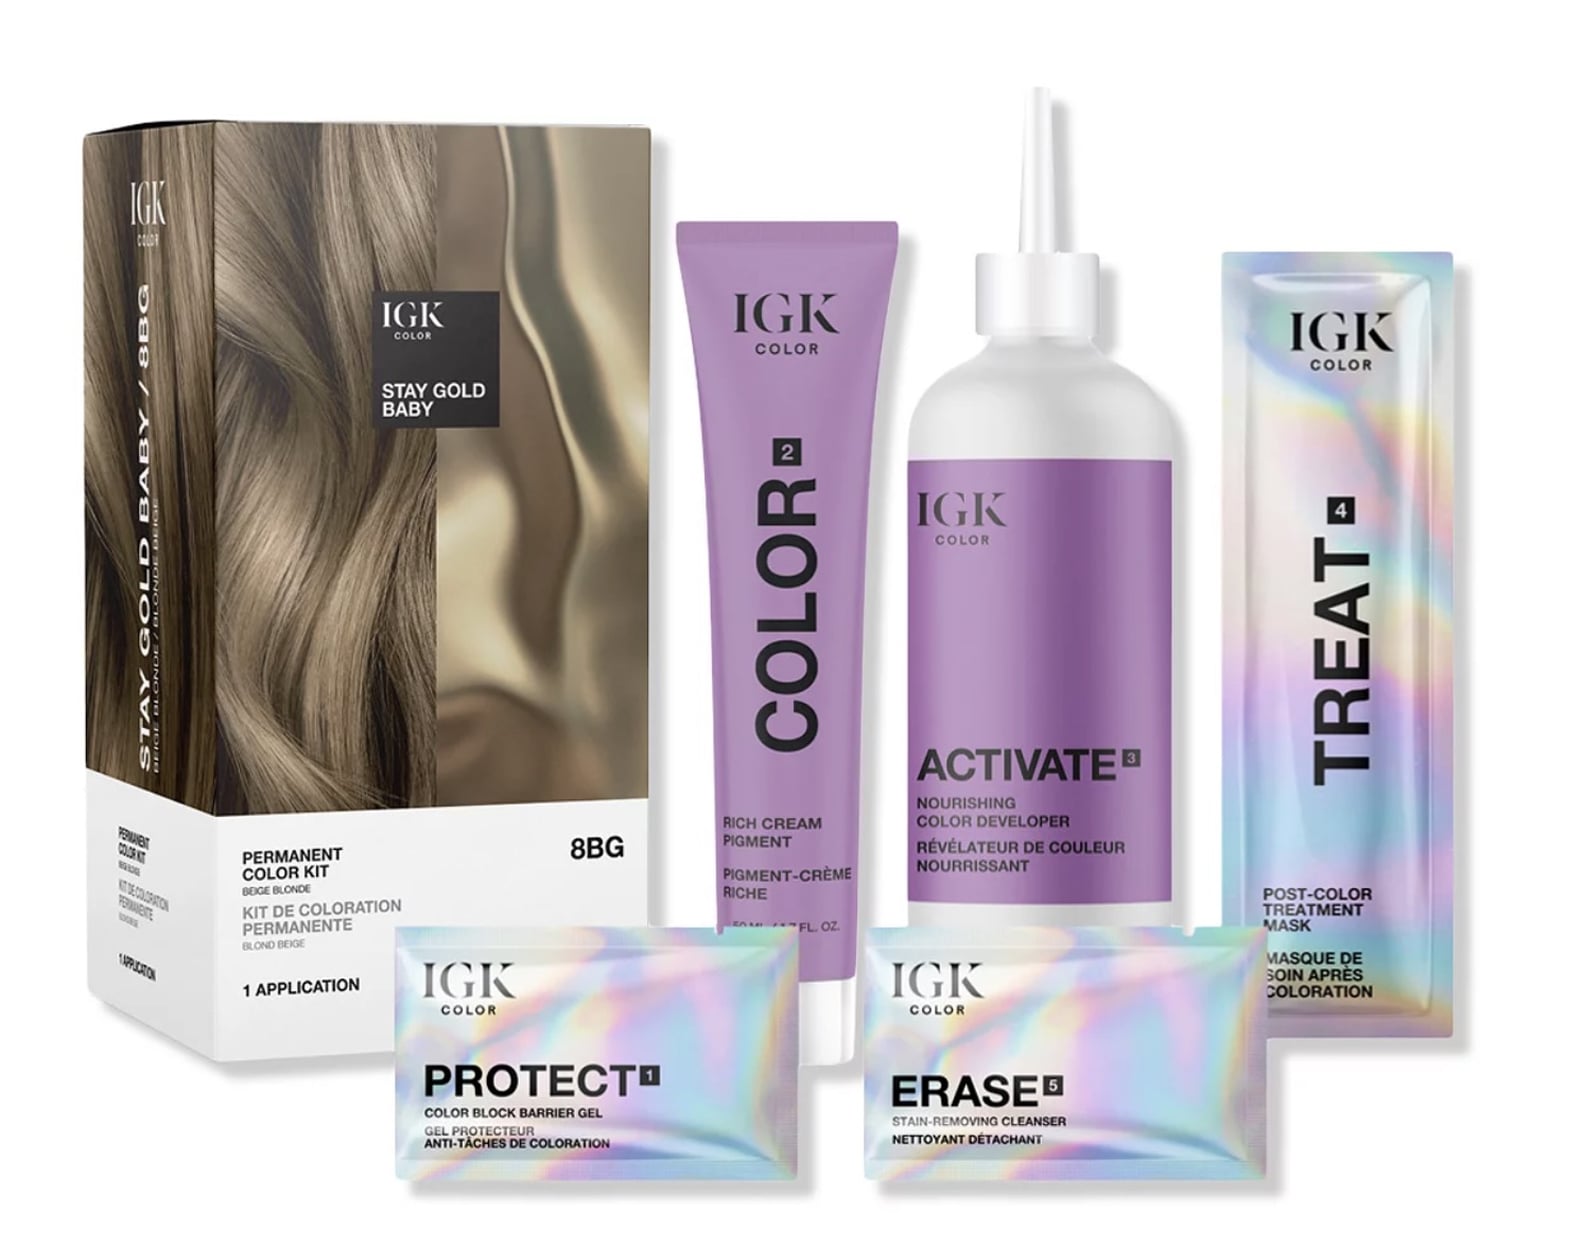 Change Hair Color At Home With Ulta Beauty Kits | POPSUGAR Beauty